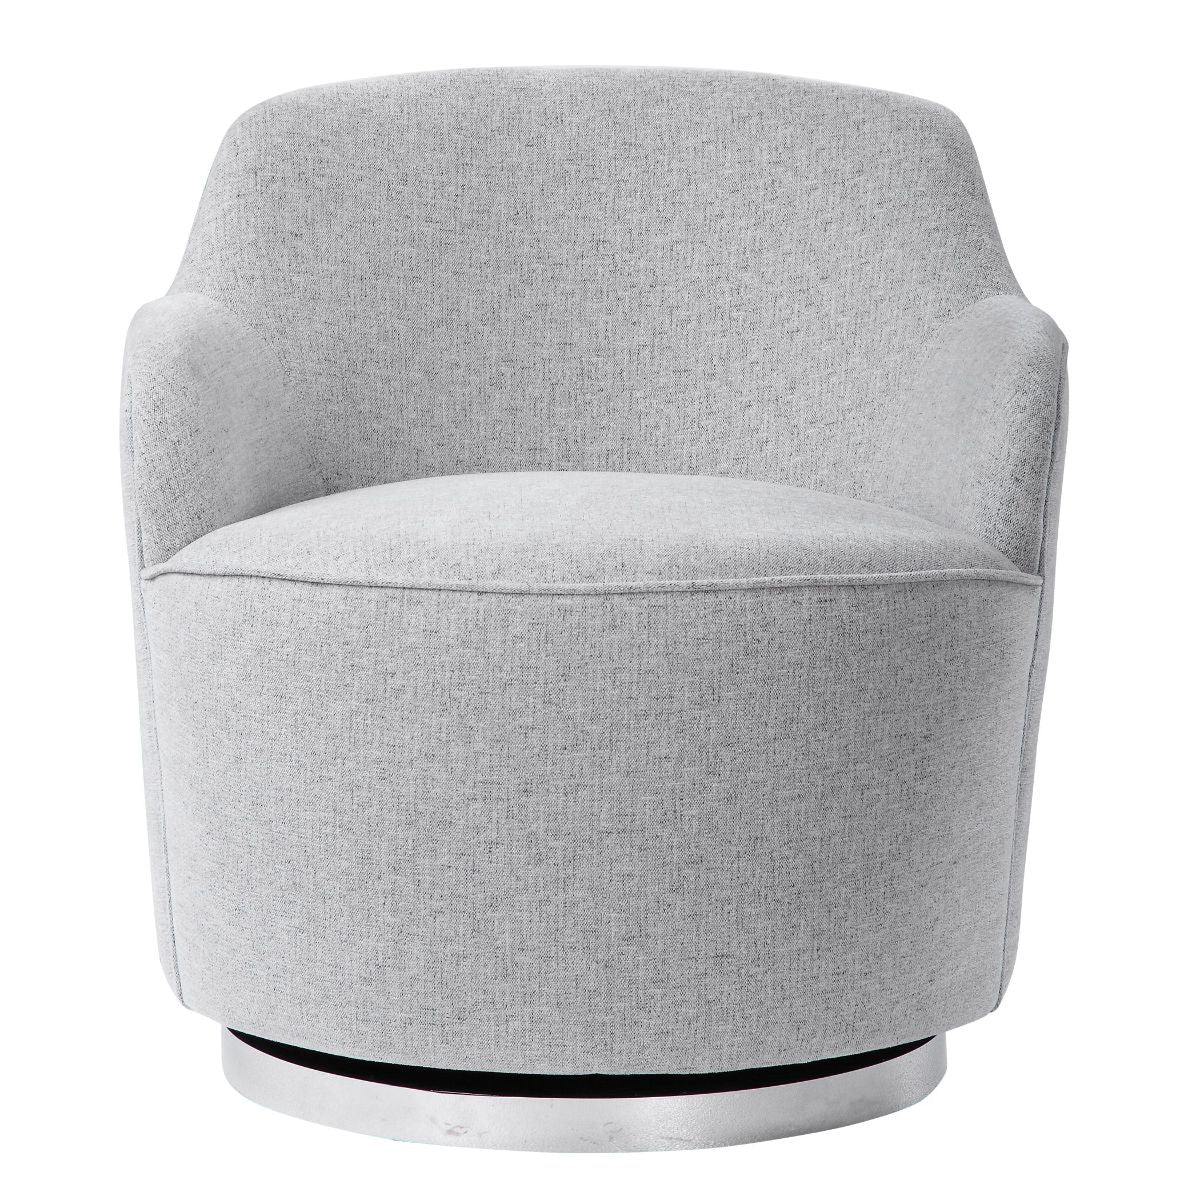 Uttermost Hobart Casual Swivel Chair